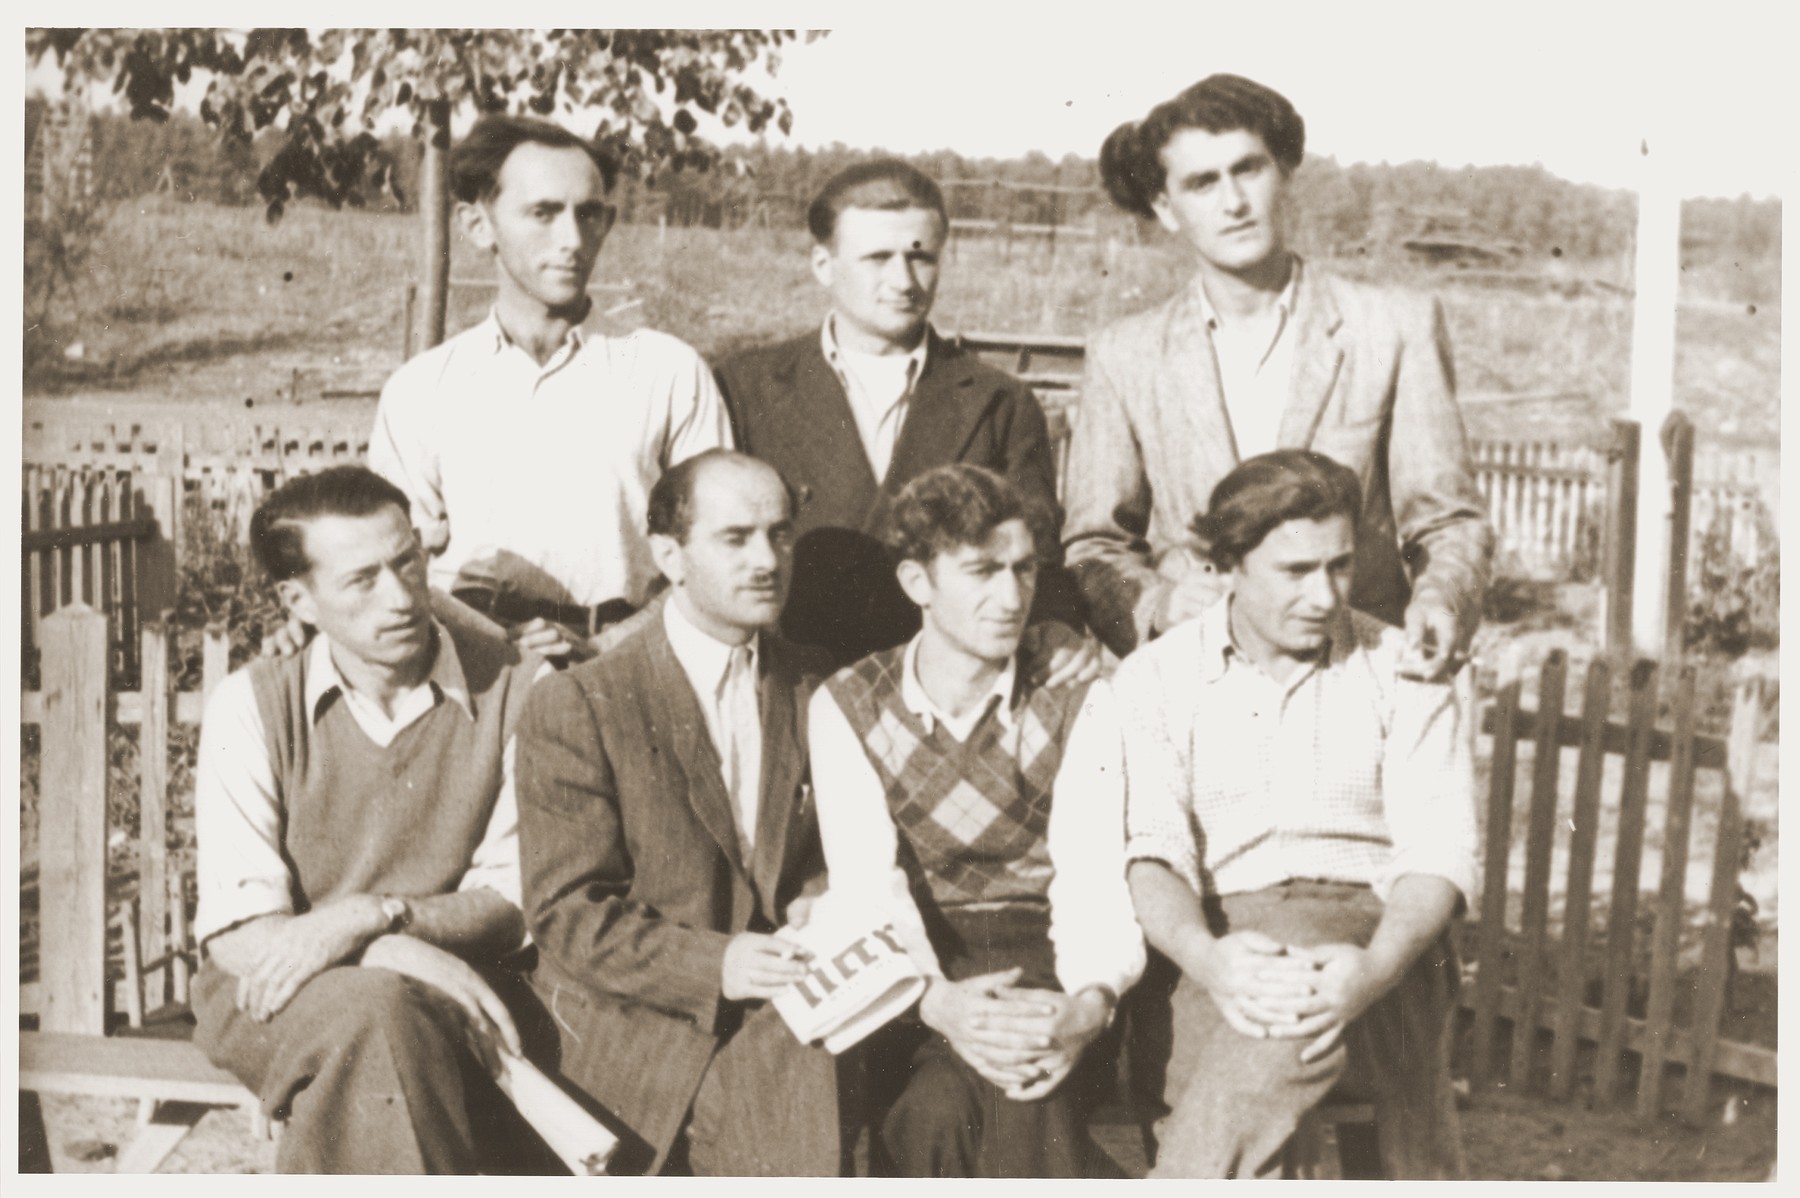 Group portrait of members of the Kibbutz Nili hachshara (Zionist collective) in Pleikershof, Germany.  

Among those pictured is Noach Miedzinski (front row, second from the left).  Pictured in the front row, far right is Mendel Gersztenblut (later Max Gersten).